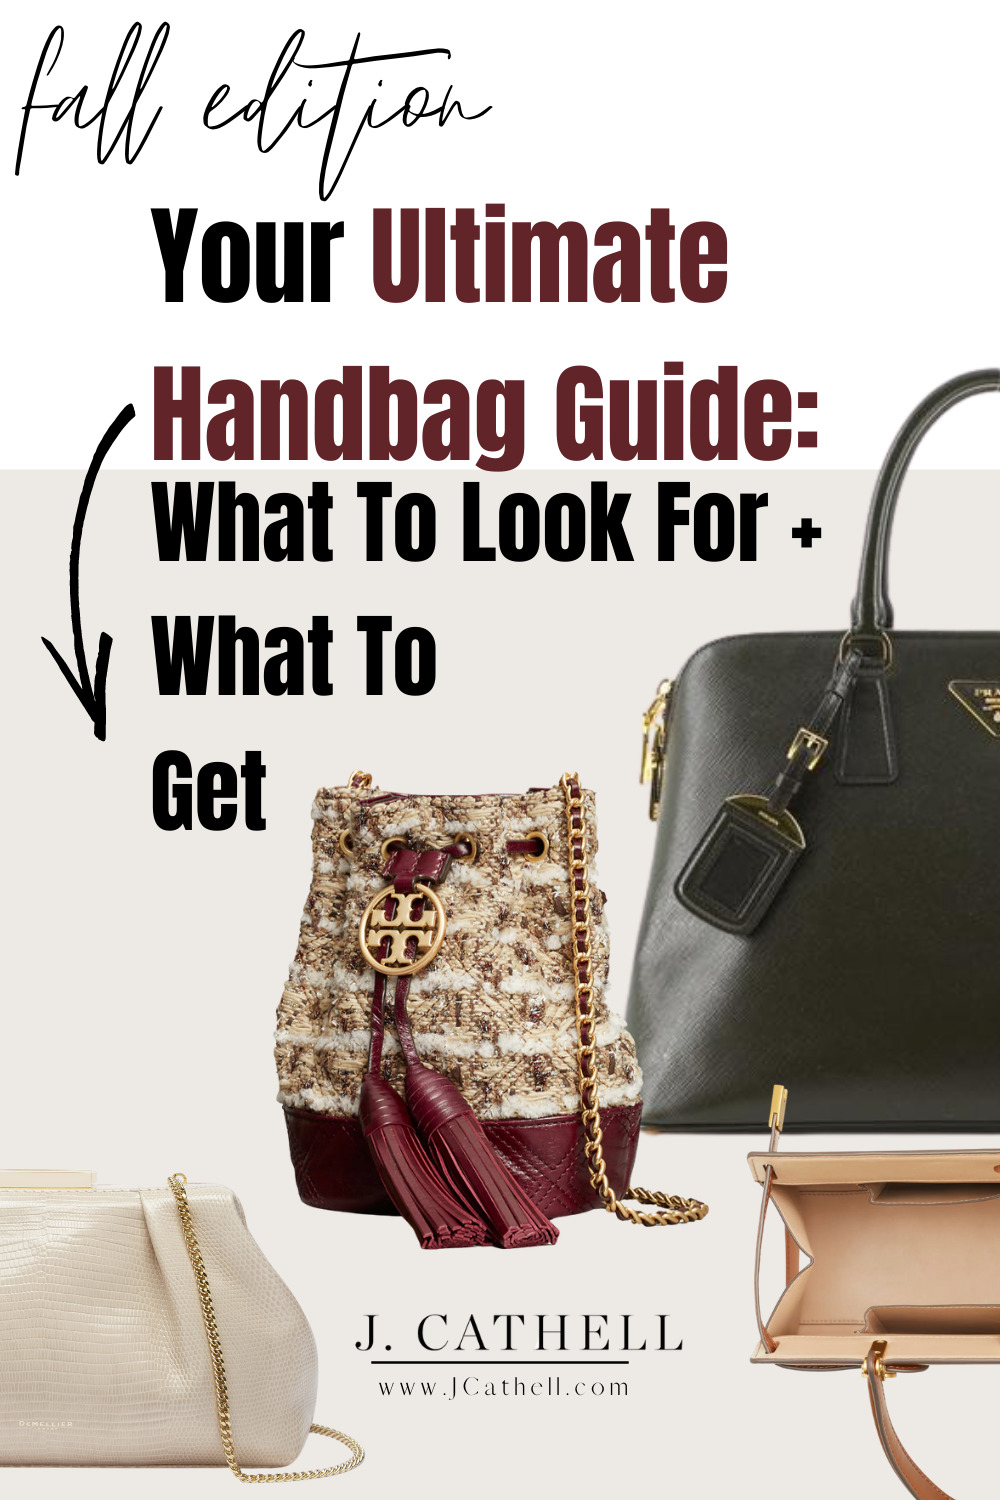 Your Ultimate Guide To Handbags: Fall Edition - J. Cathell